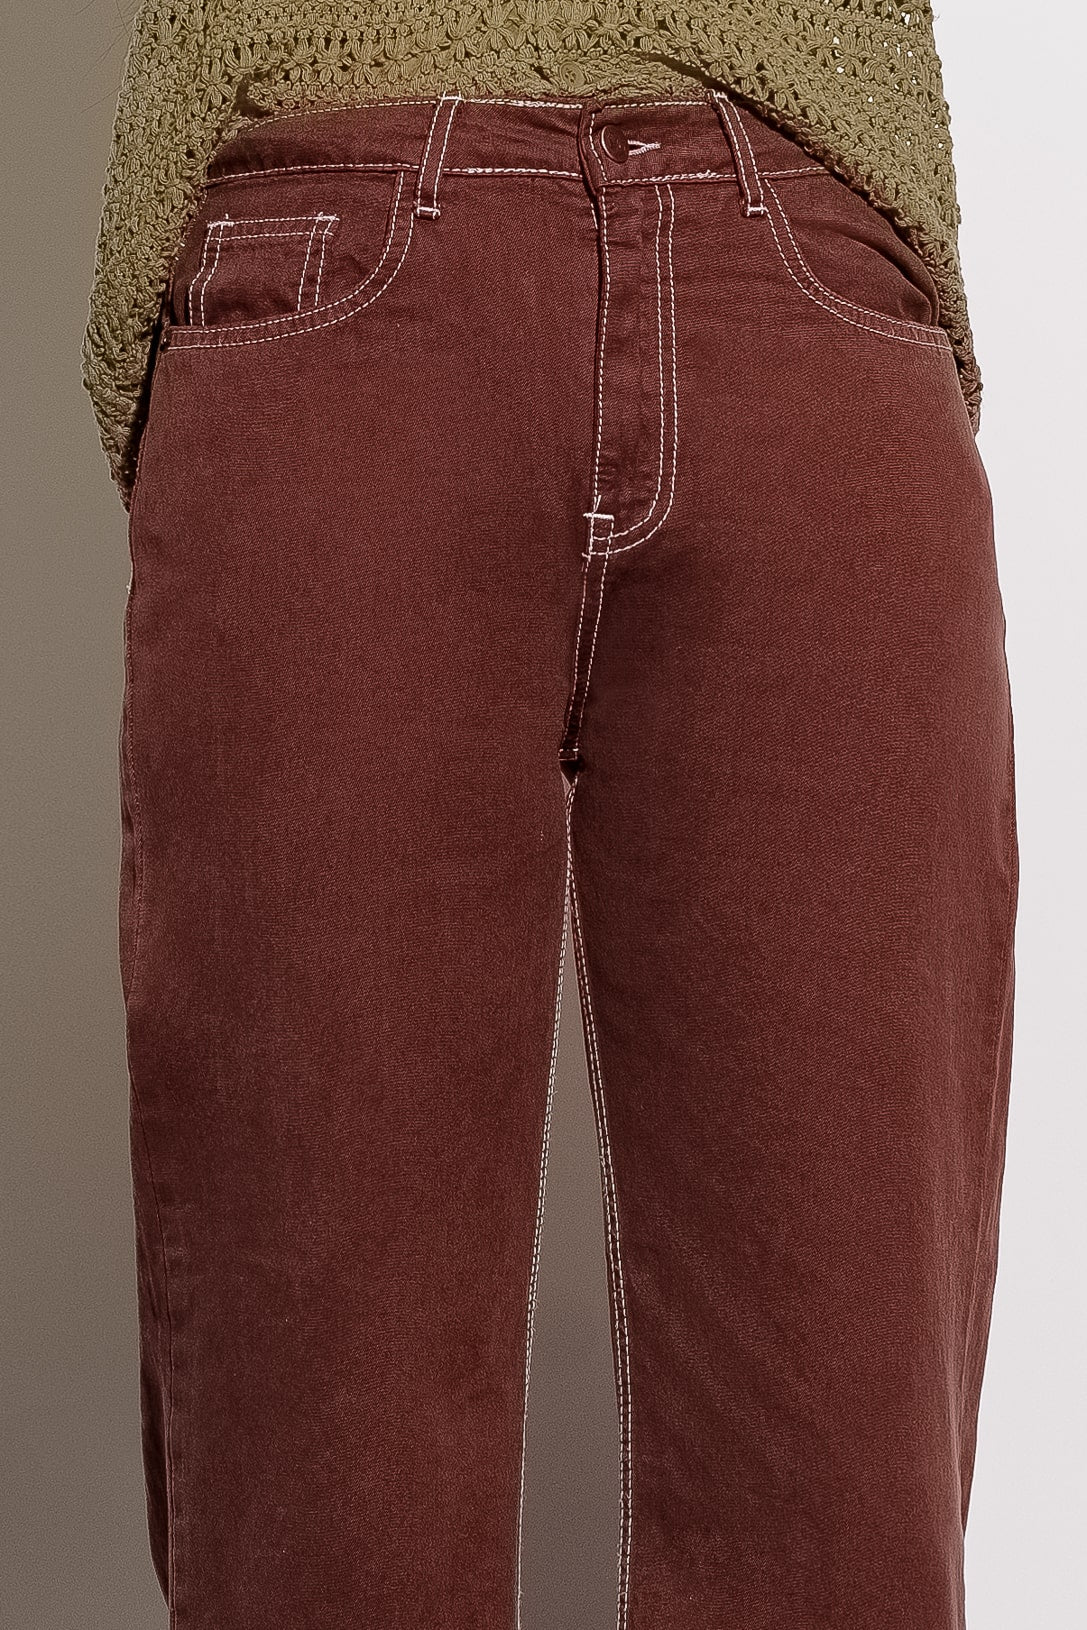 BROWN CONTRAST STITCH WIDE JEANS